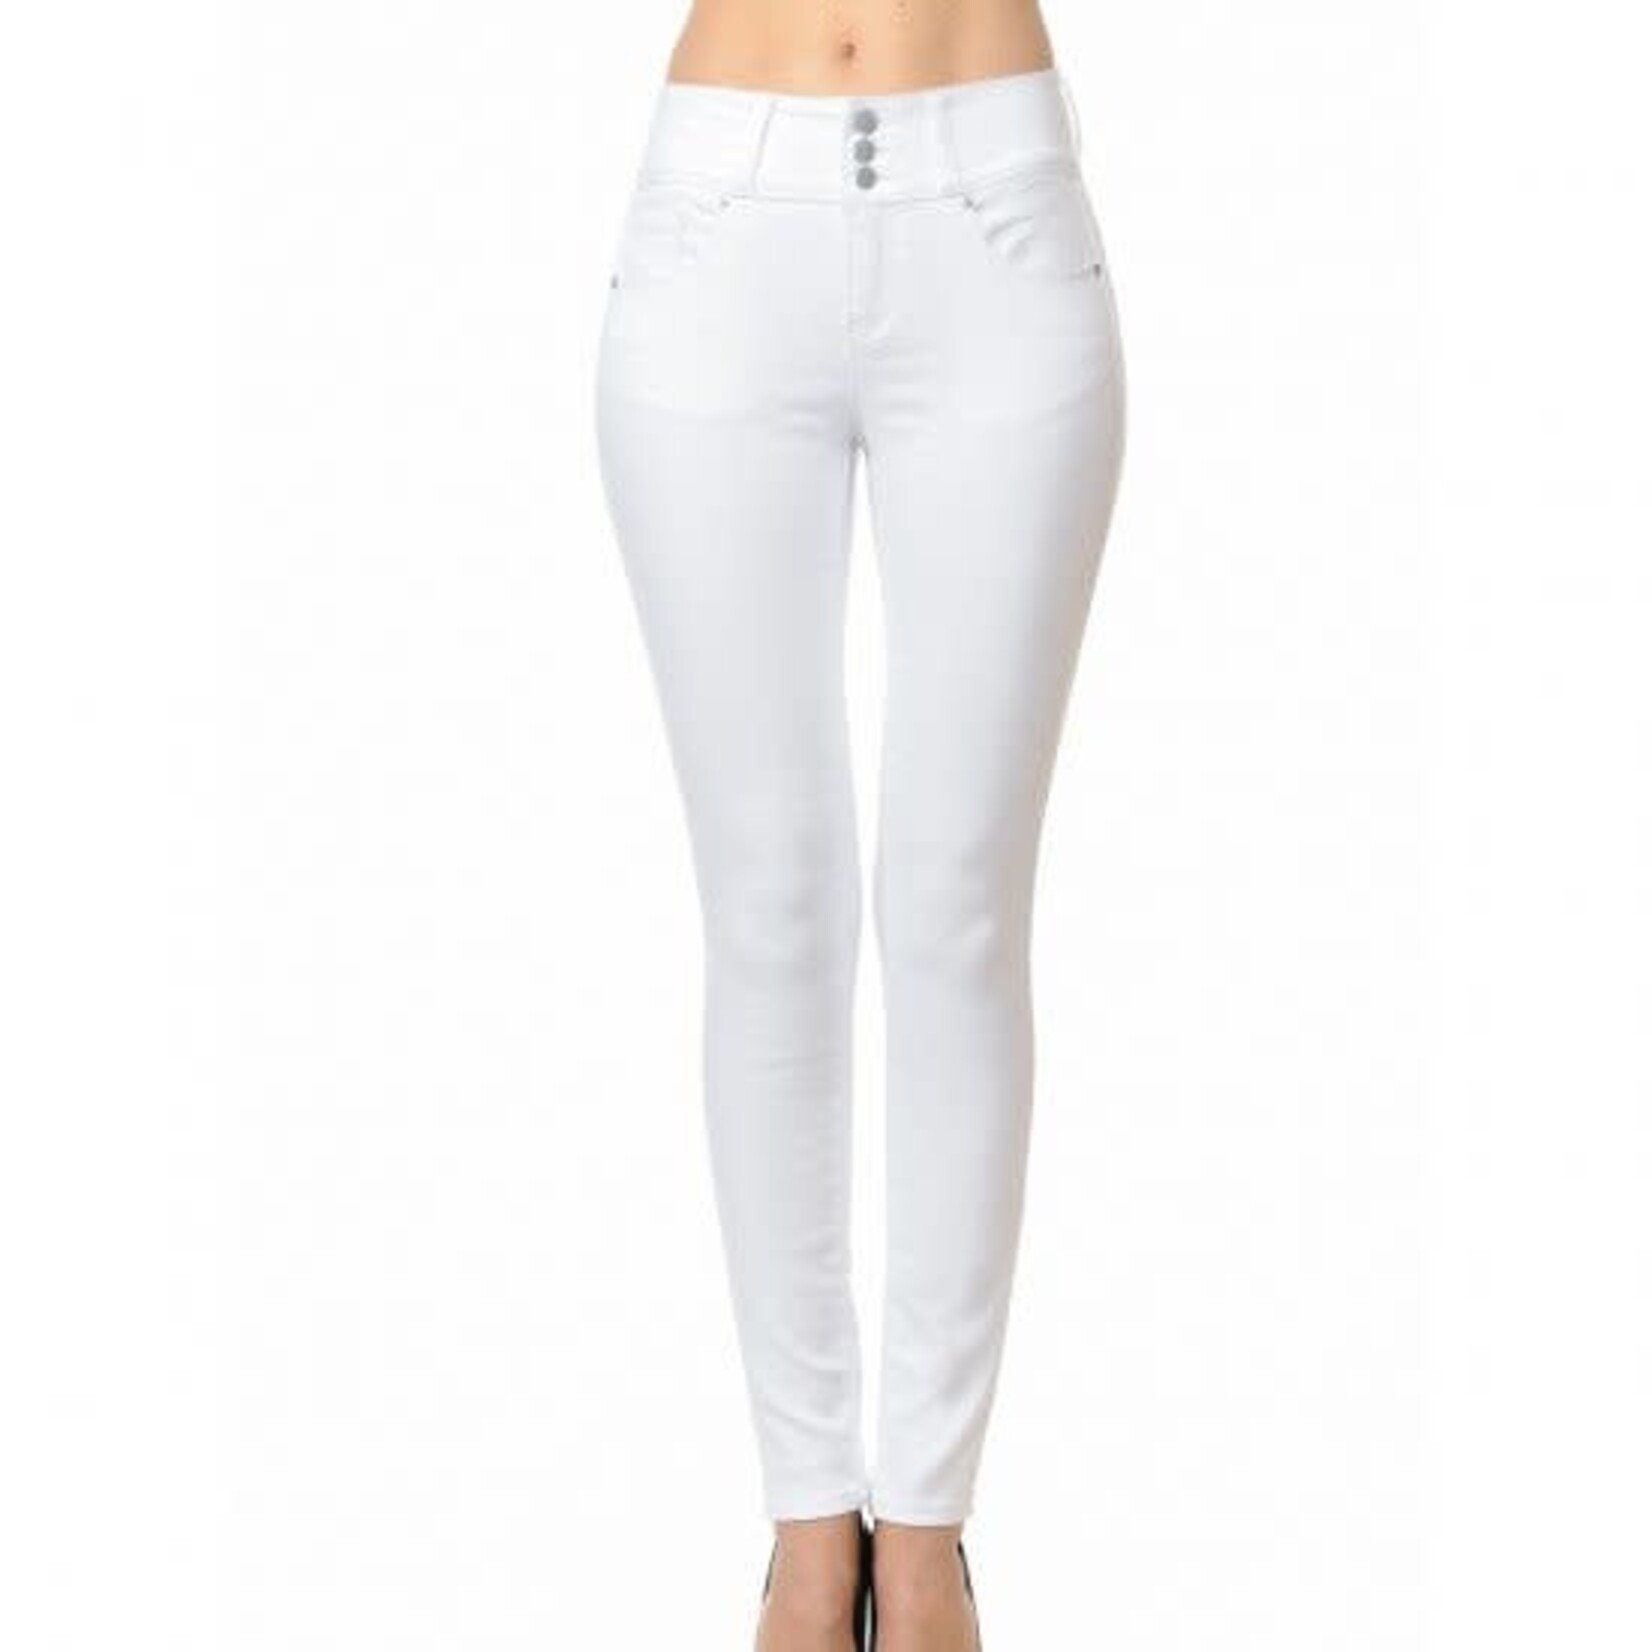 Wax Jeans Wax Jeans - High-Rise Push-Up Super Comfy Skinny Jean - 90400